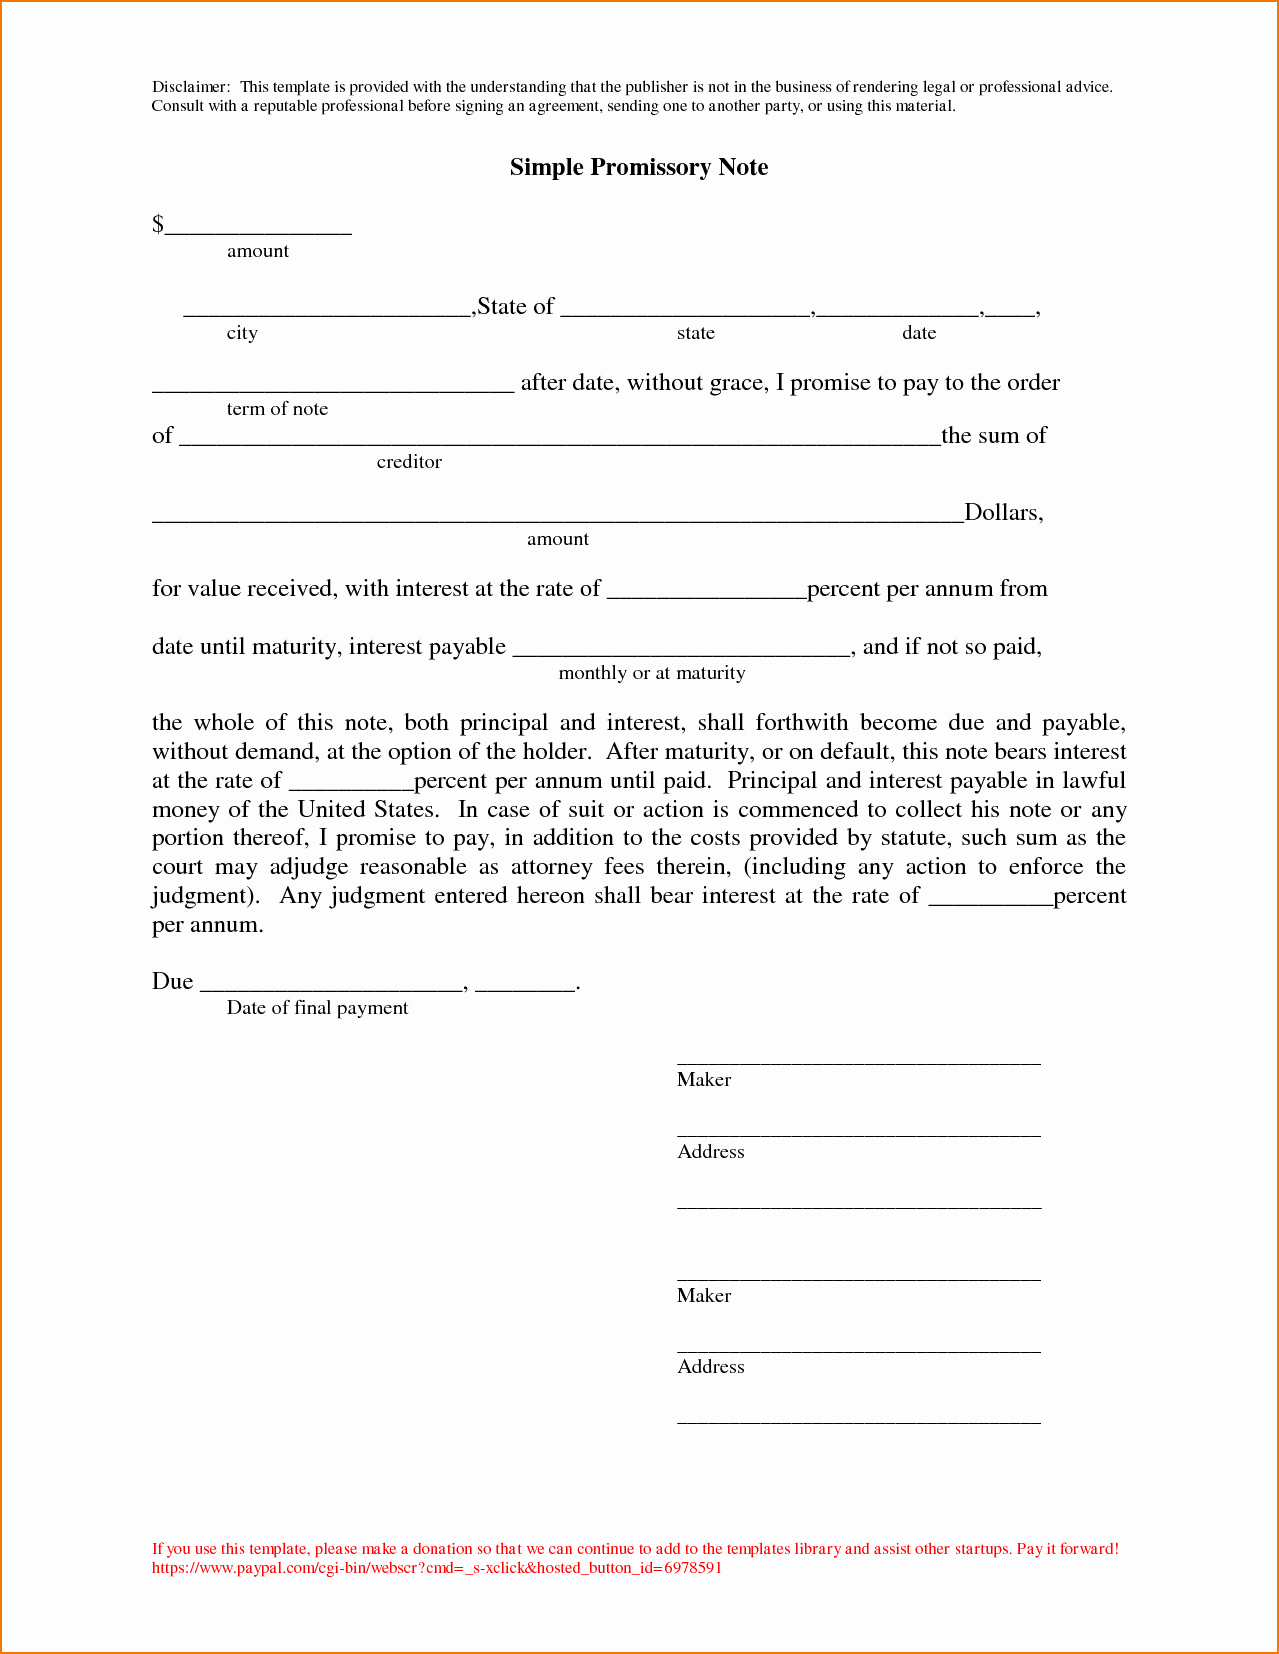 5 Simple Promissory Note Template